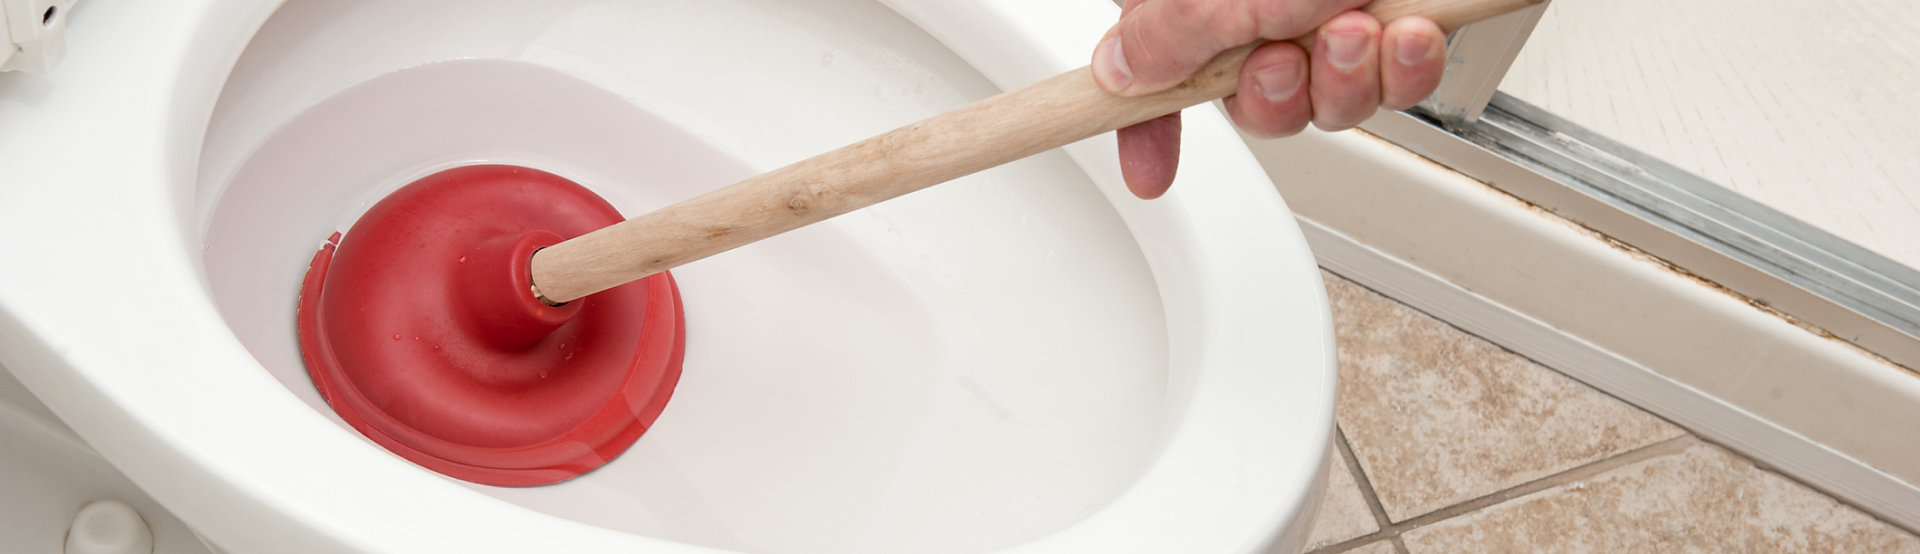 A person using a plunger to plunge a toilet